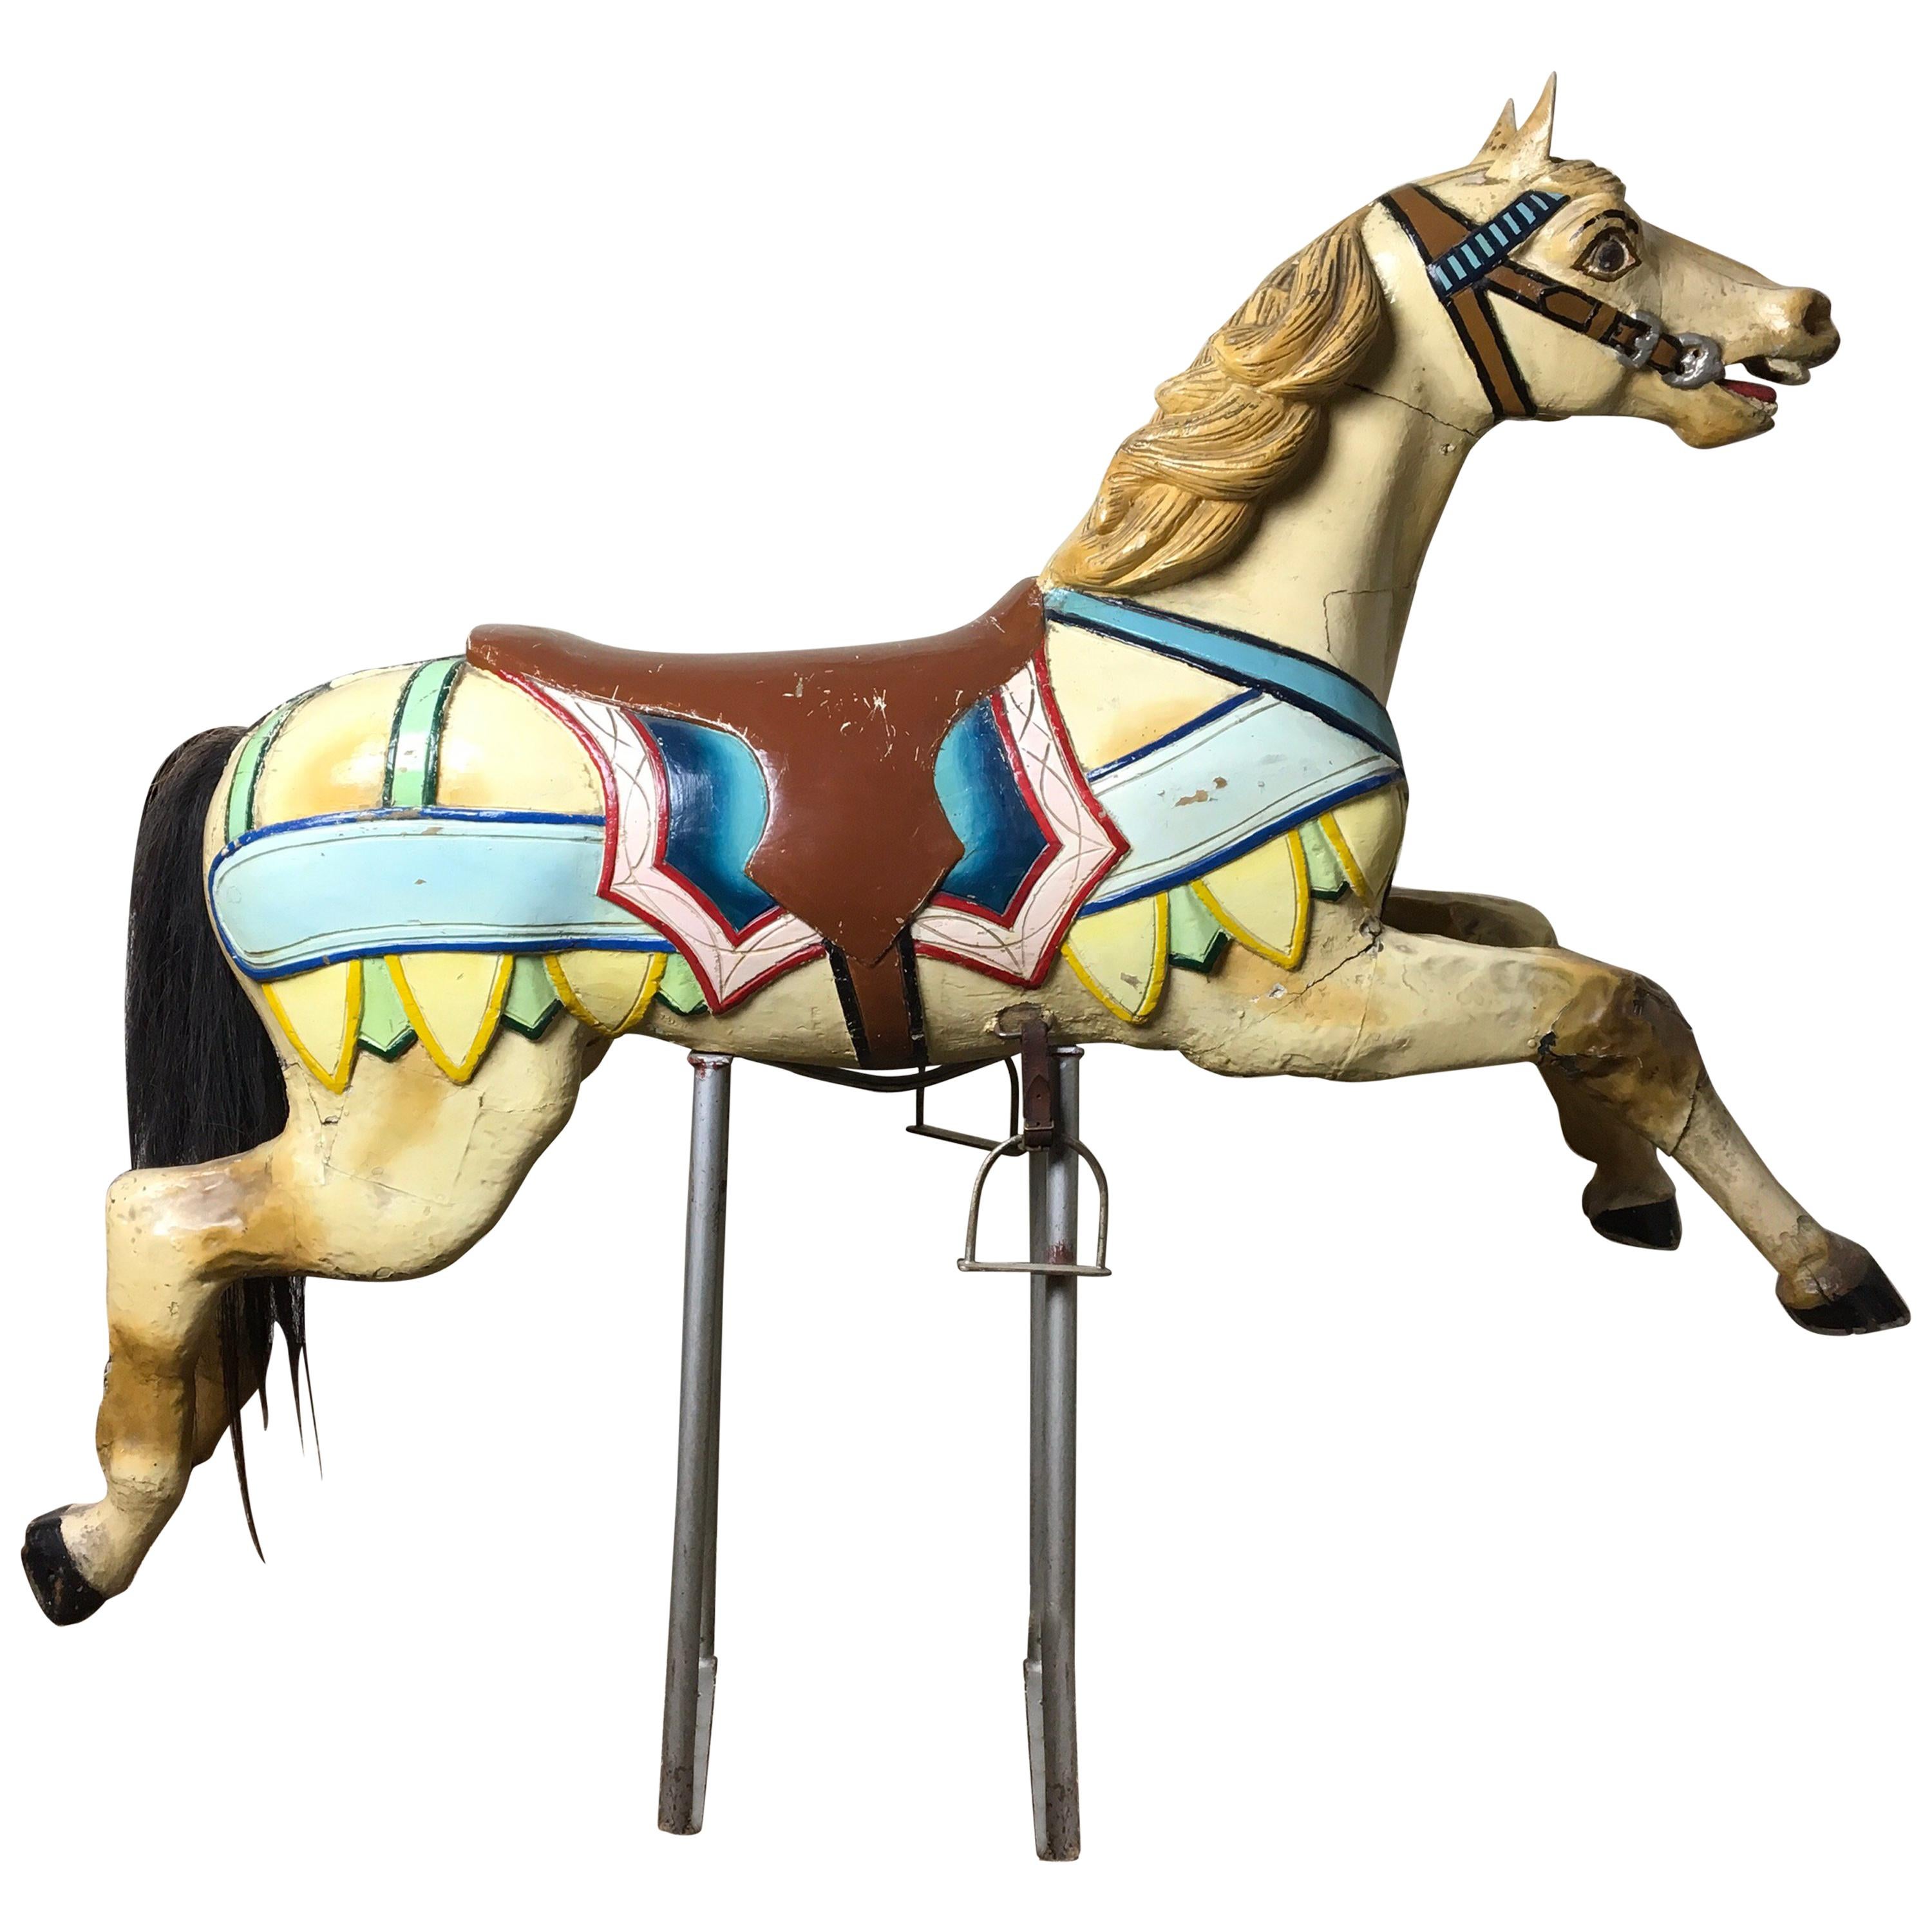 J. Hübner Germany  Carved Wood Carousel Horse Early 20th Century